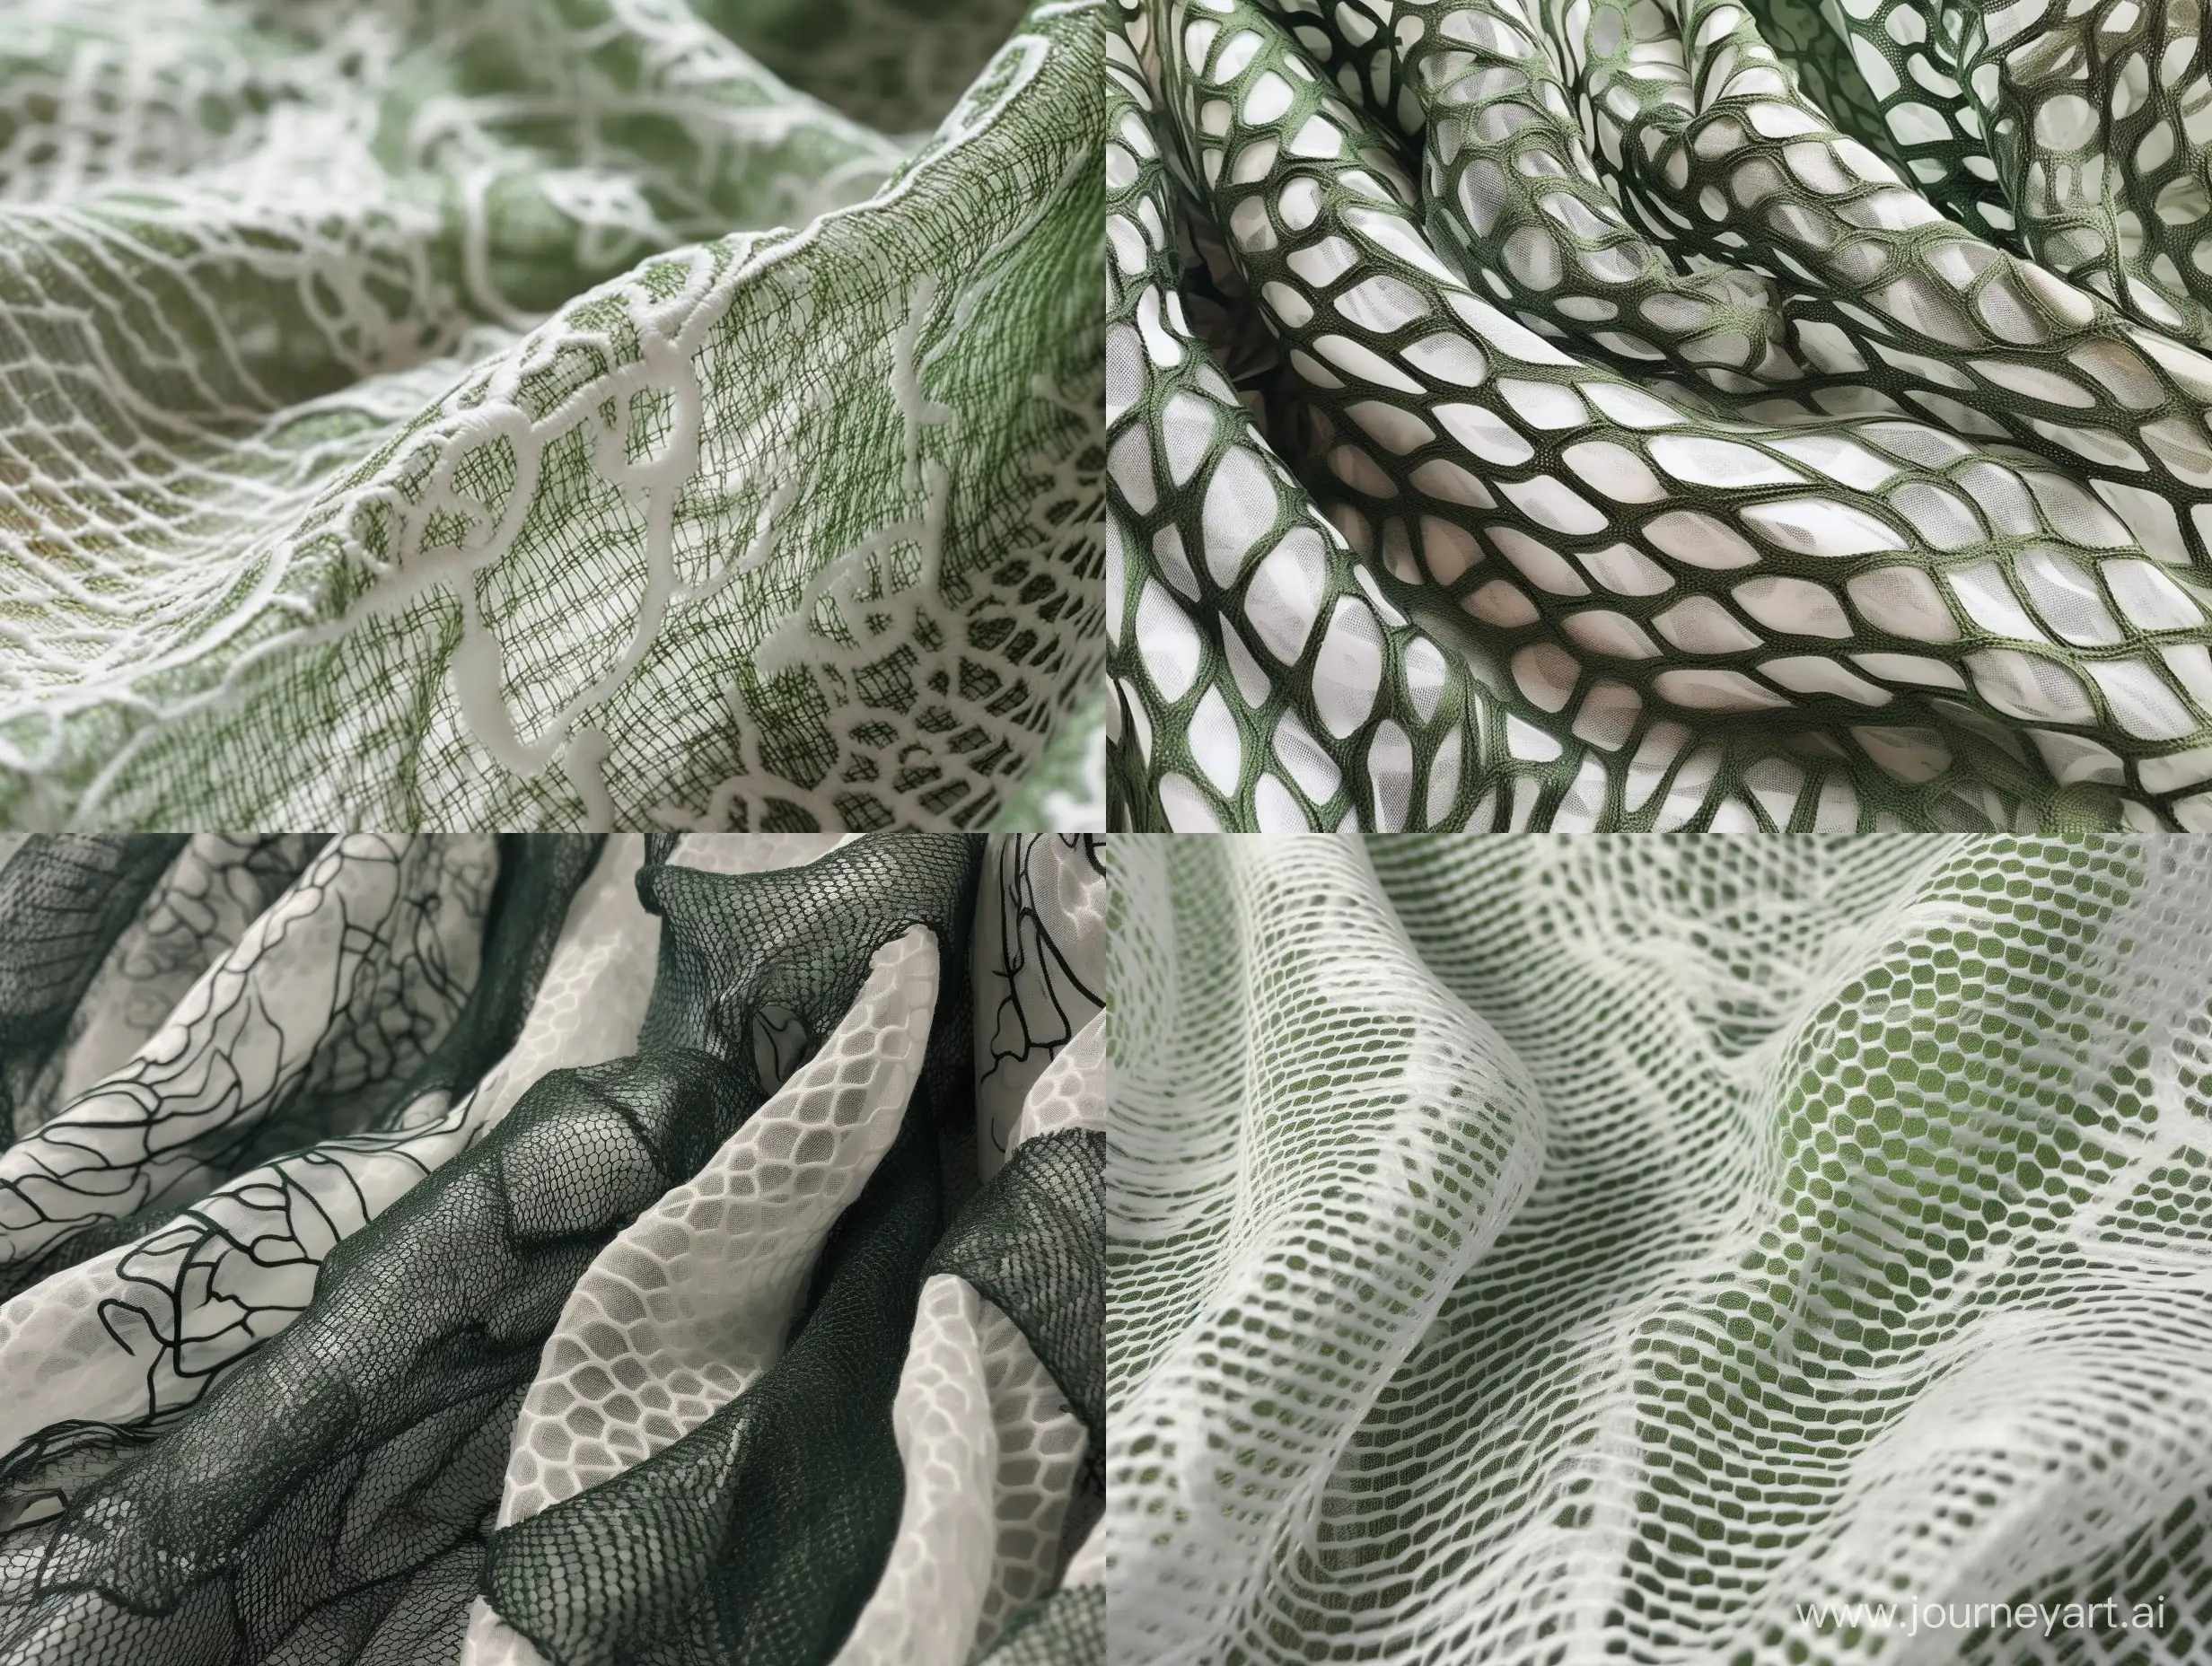 a close up image of green and white fabric, in the style of layered mesh, figura serpentinata, transparent/translucent medium, holotone printing, organic form, woven/perforated, graphic, stylized forms --v 5 --v 5